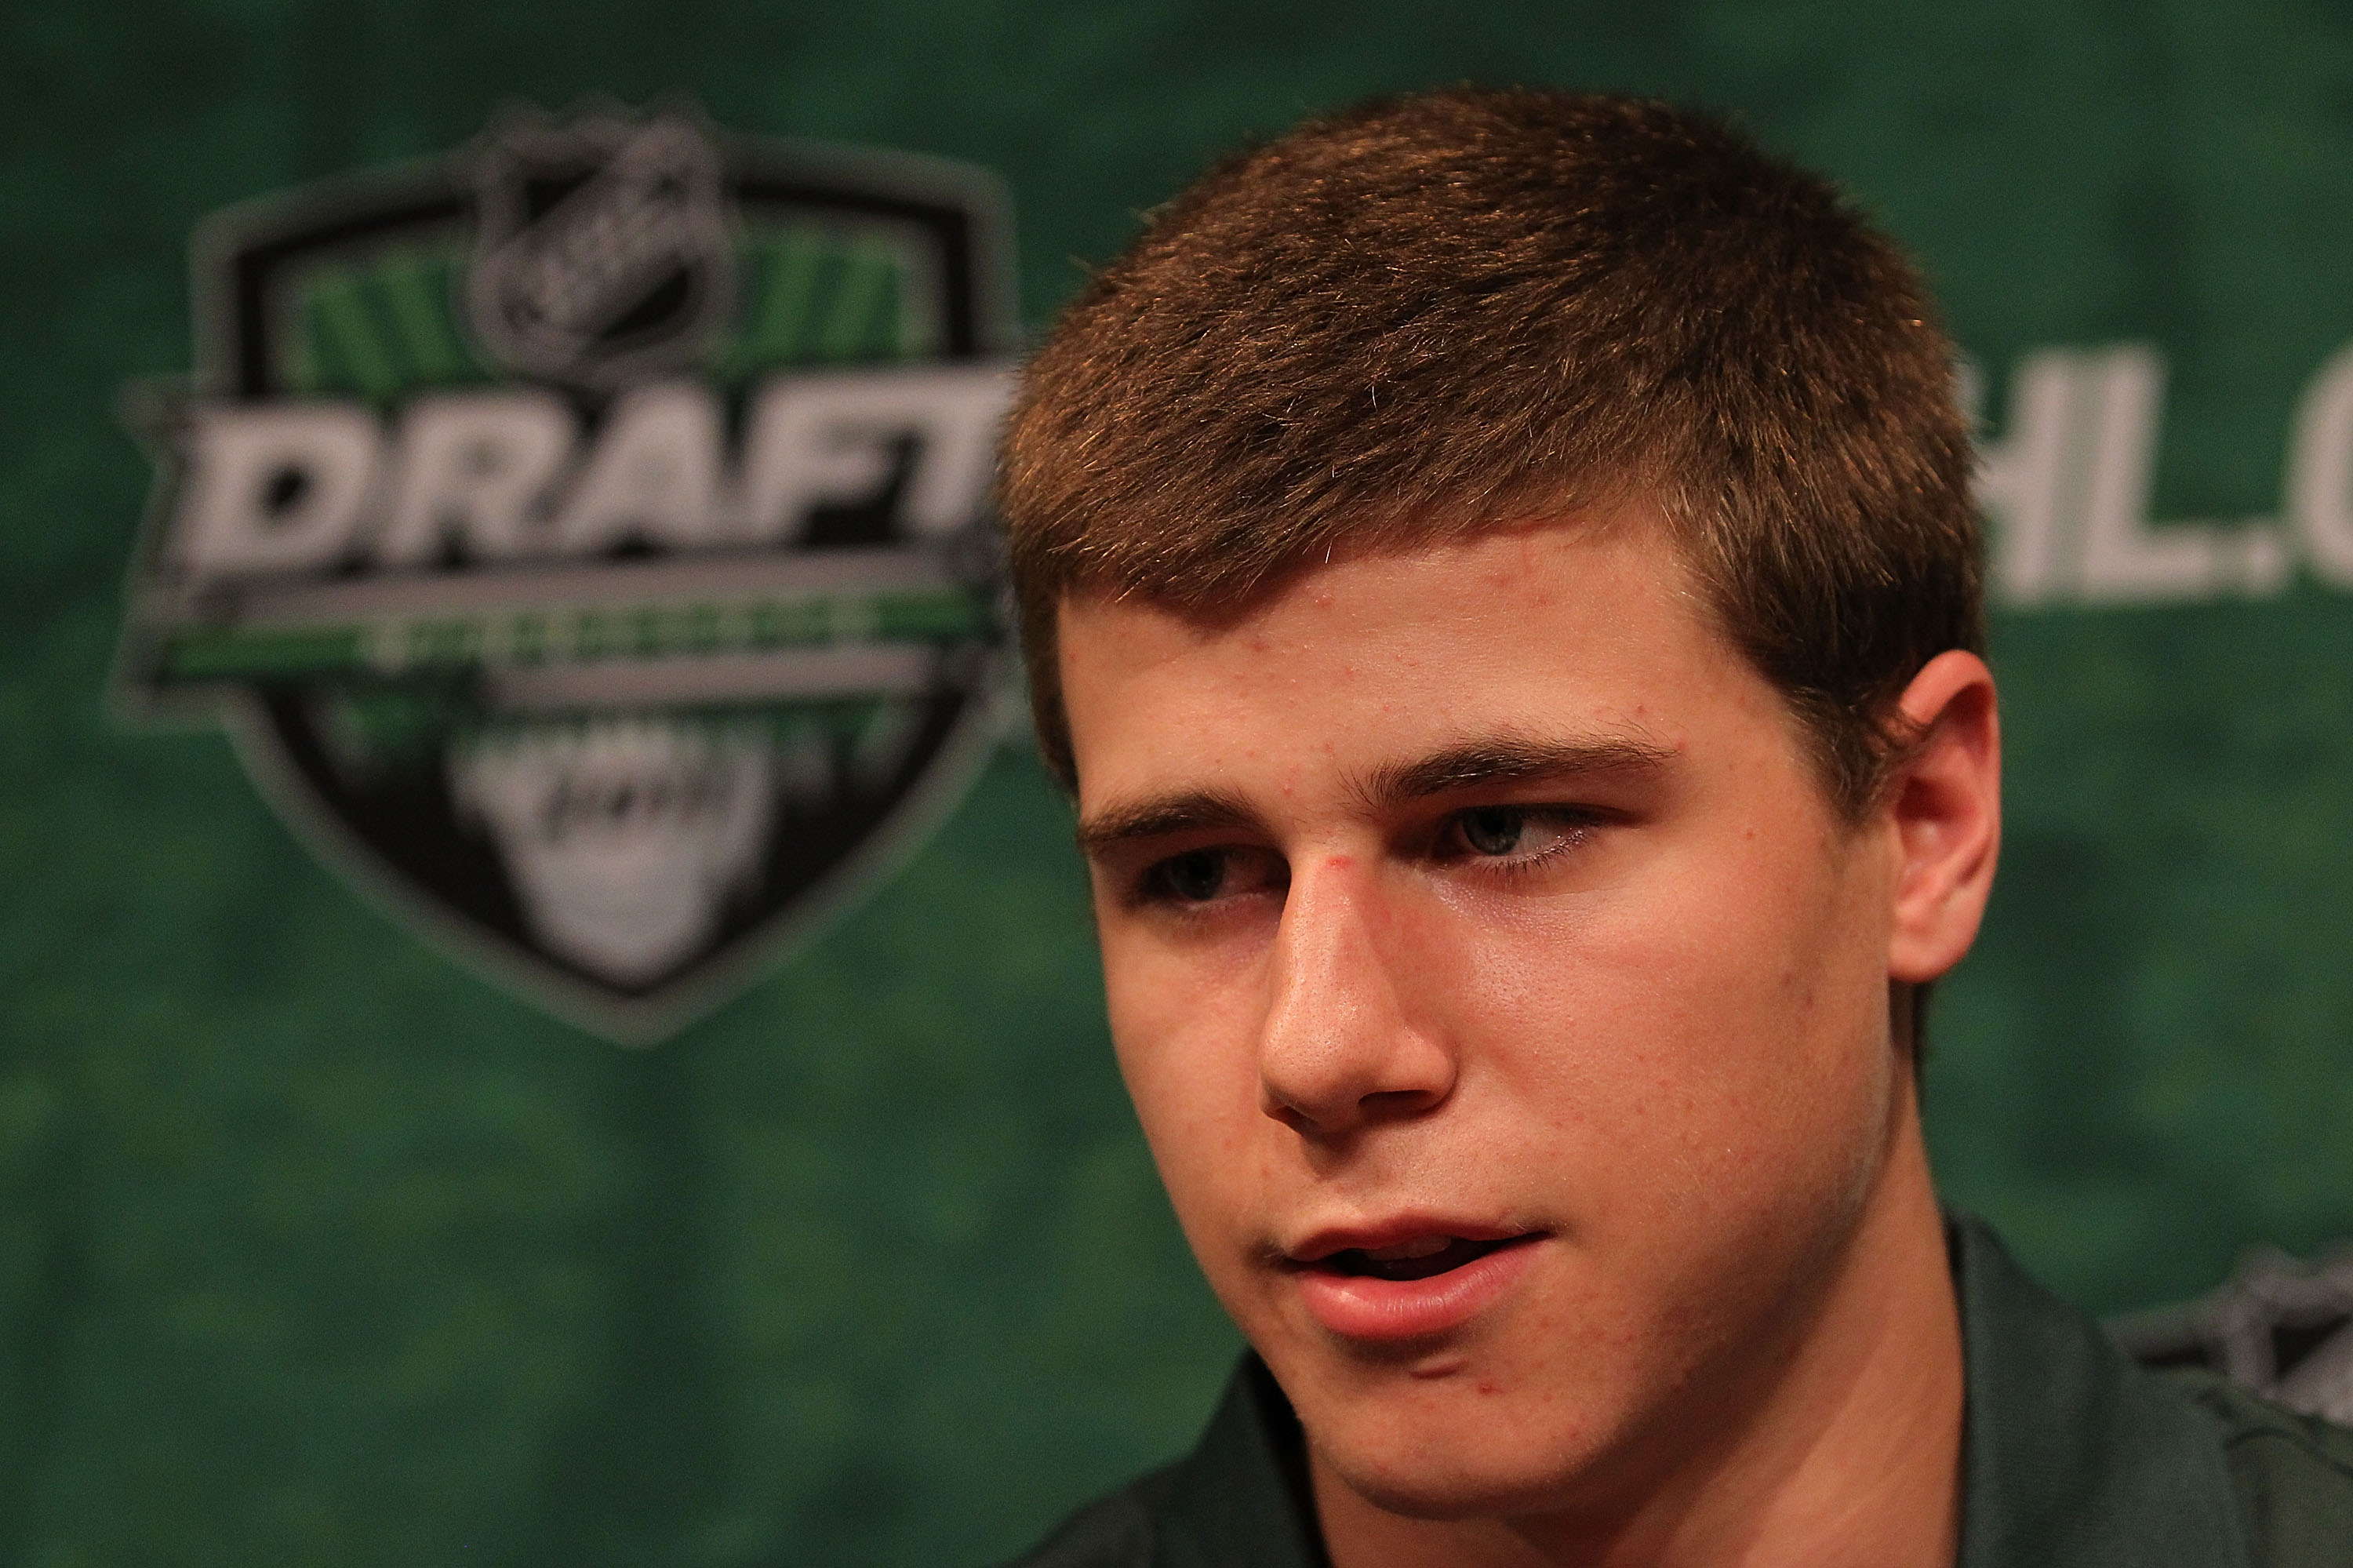 Nathan Beaulieu talks to members of the media during the Top Prospects Media Availability as part of the 2011 NHL Entry Draft at Walker Arts Center on June 23, 2011 in Minneapolis, Minnesota.